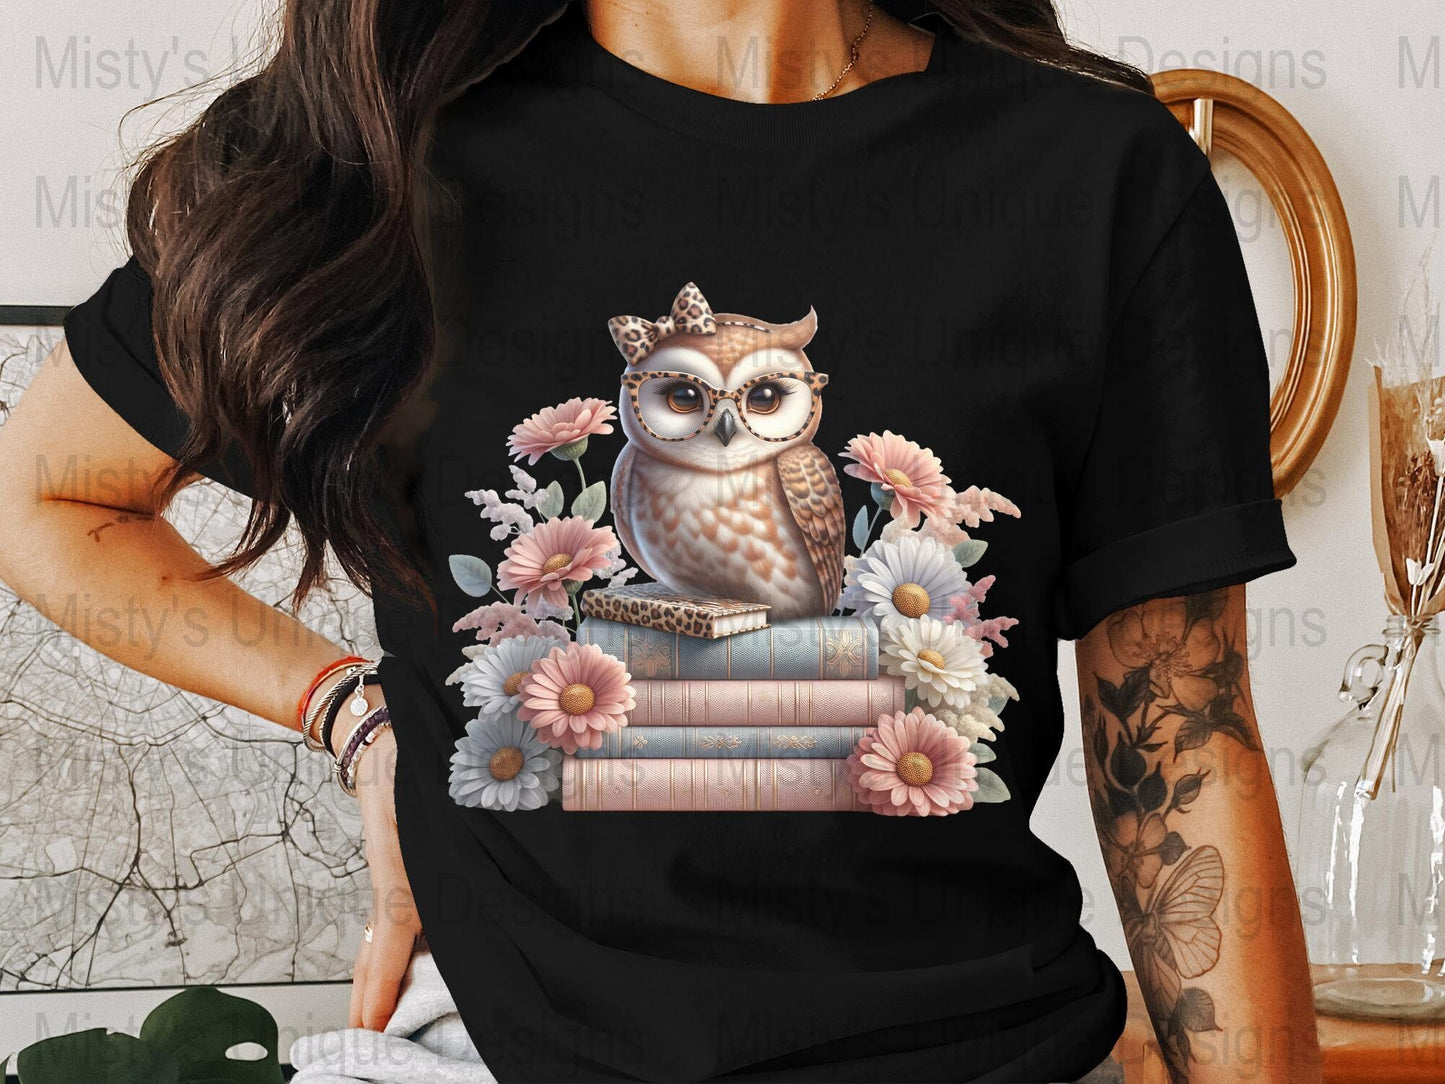 Cute Owl With Glasses Clipart, Floral Digital Download, PNG Illustration, Book Lover Clip Art, Instant Download Commercial Use